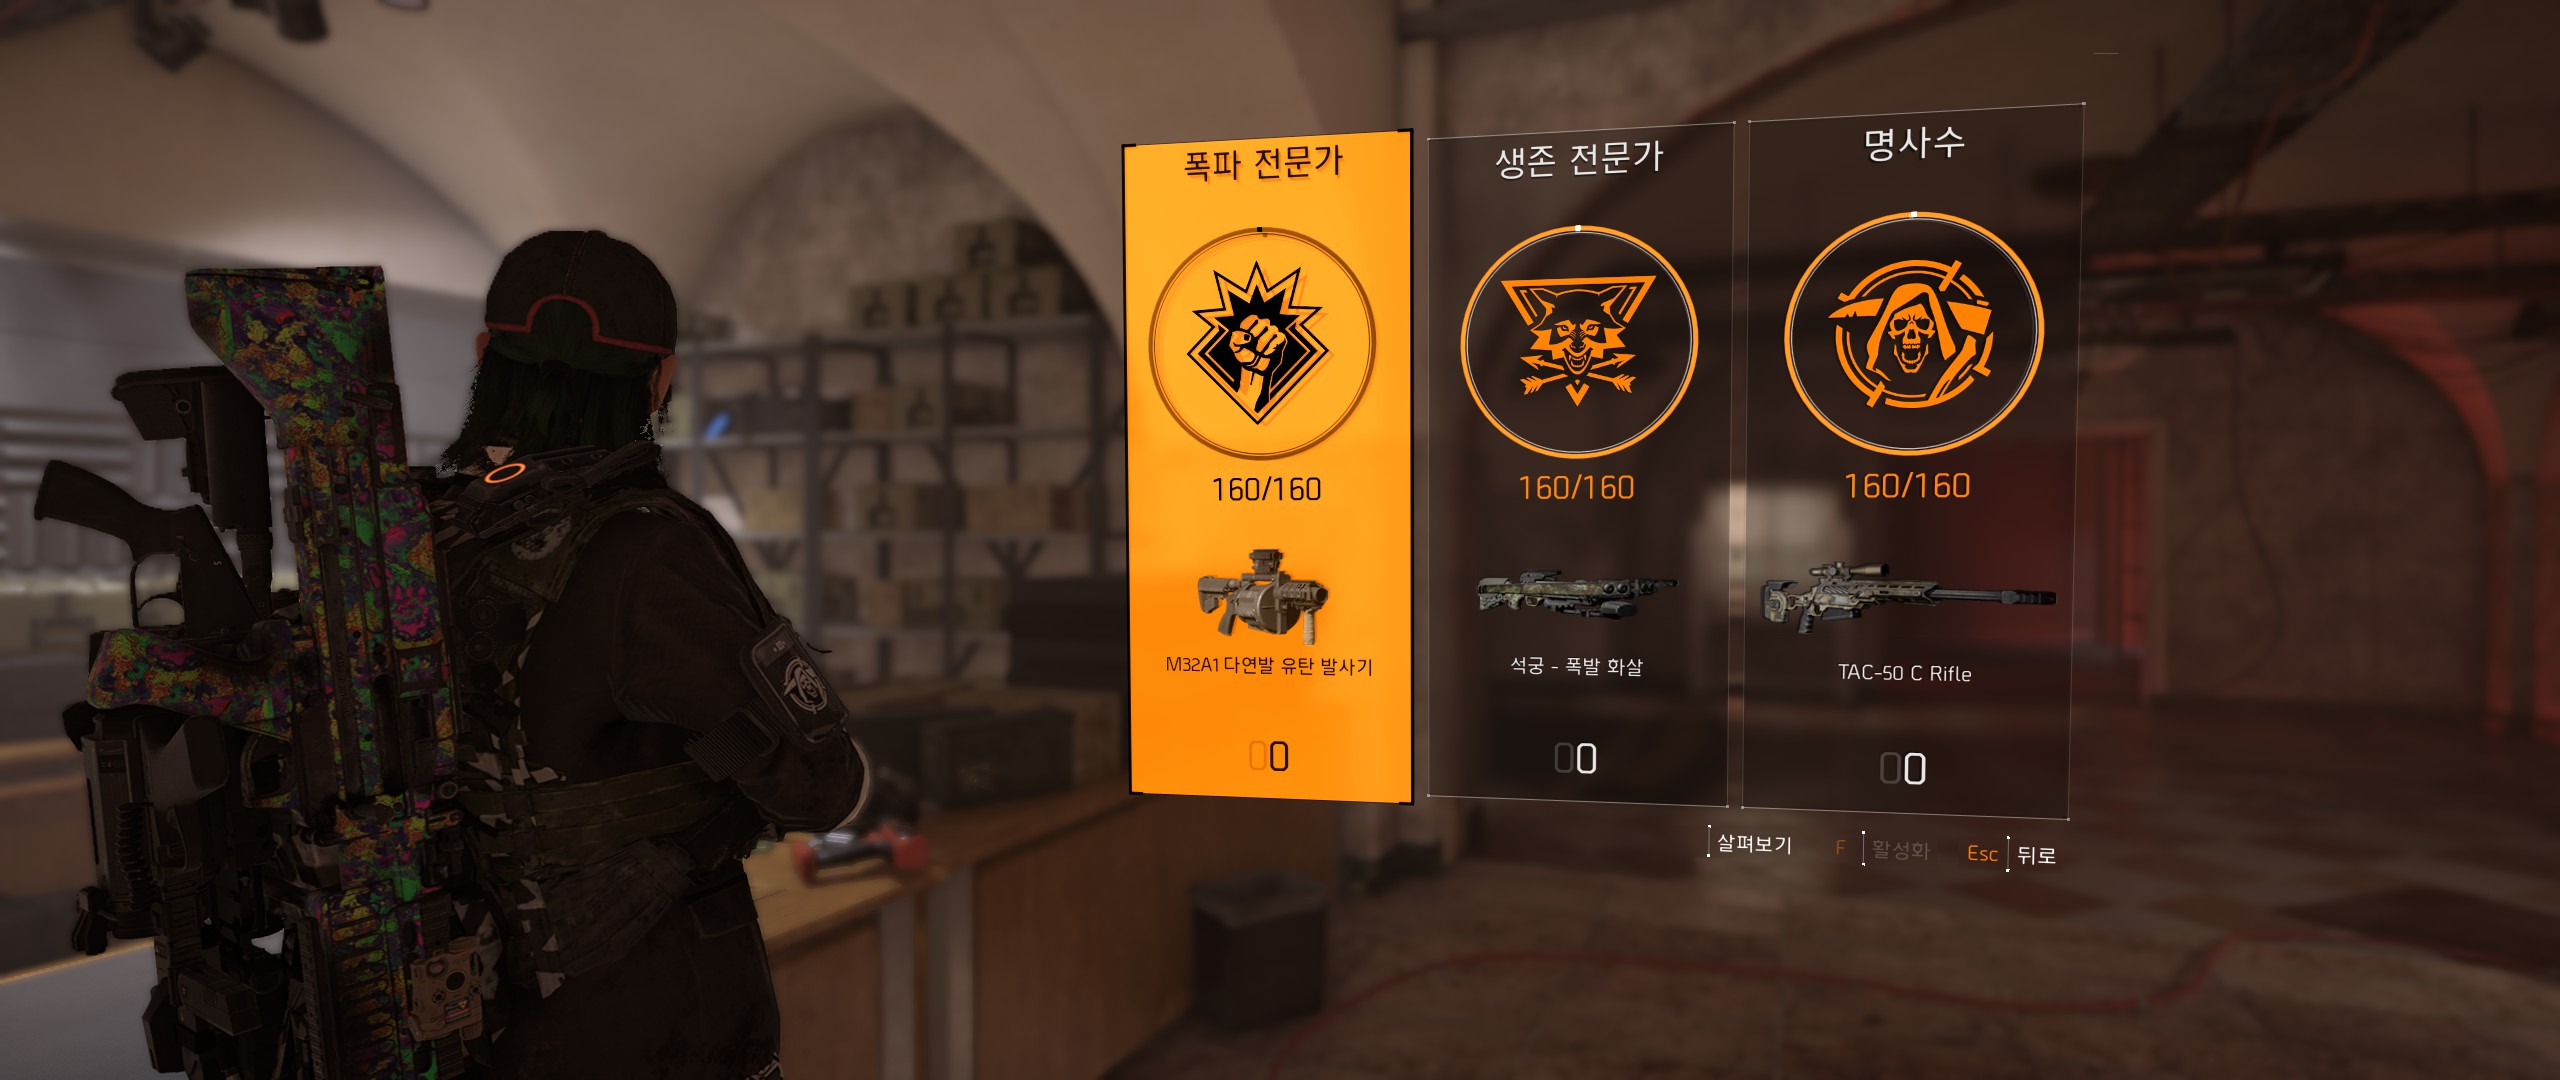 Tom Clancy's The Division® 22019-4-4-19-50-50.jpg